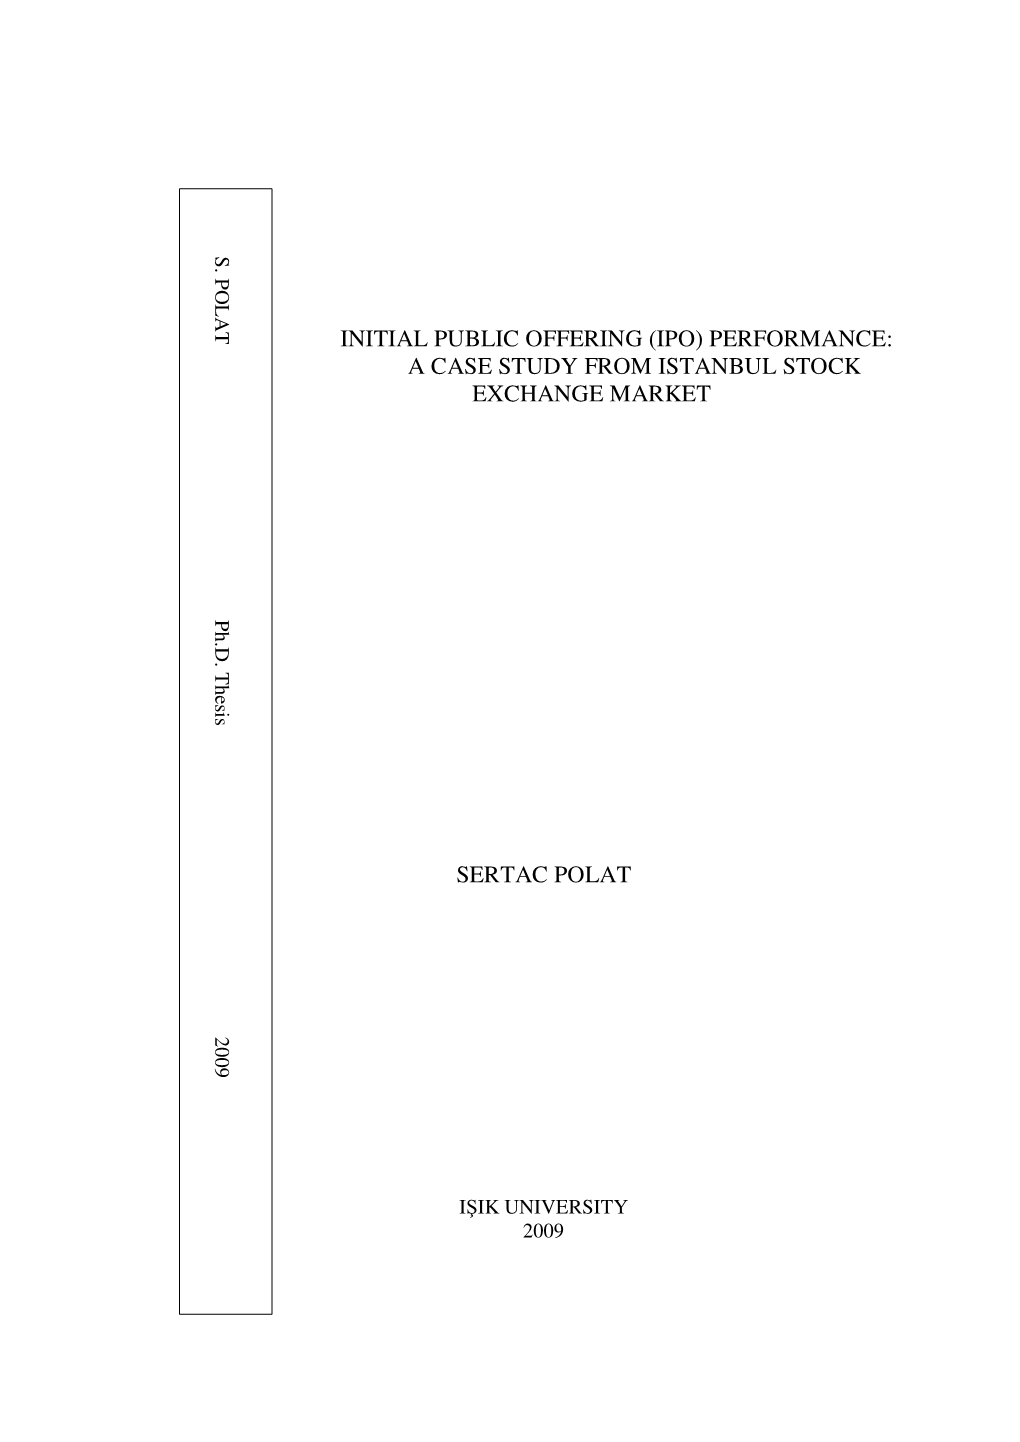 Initial Public Offering (Ipo) Performance: a Case Study from Istanbul Stock Exchange Market